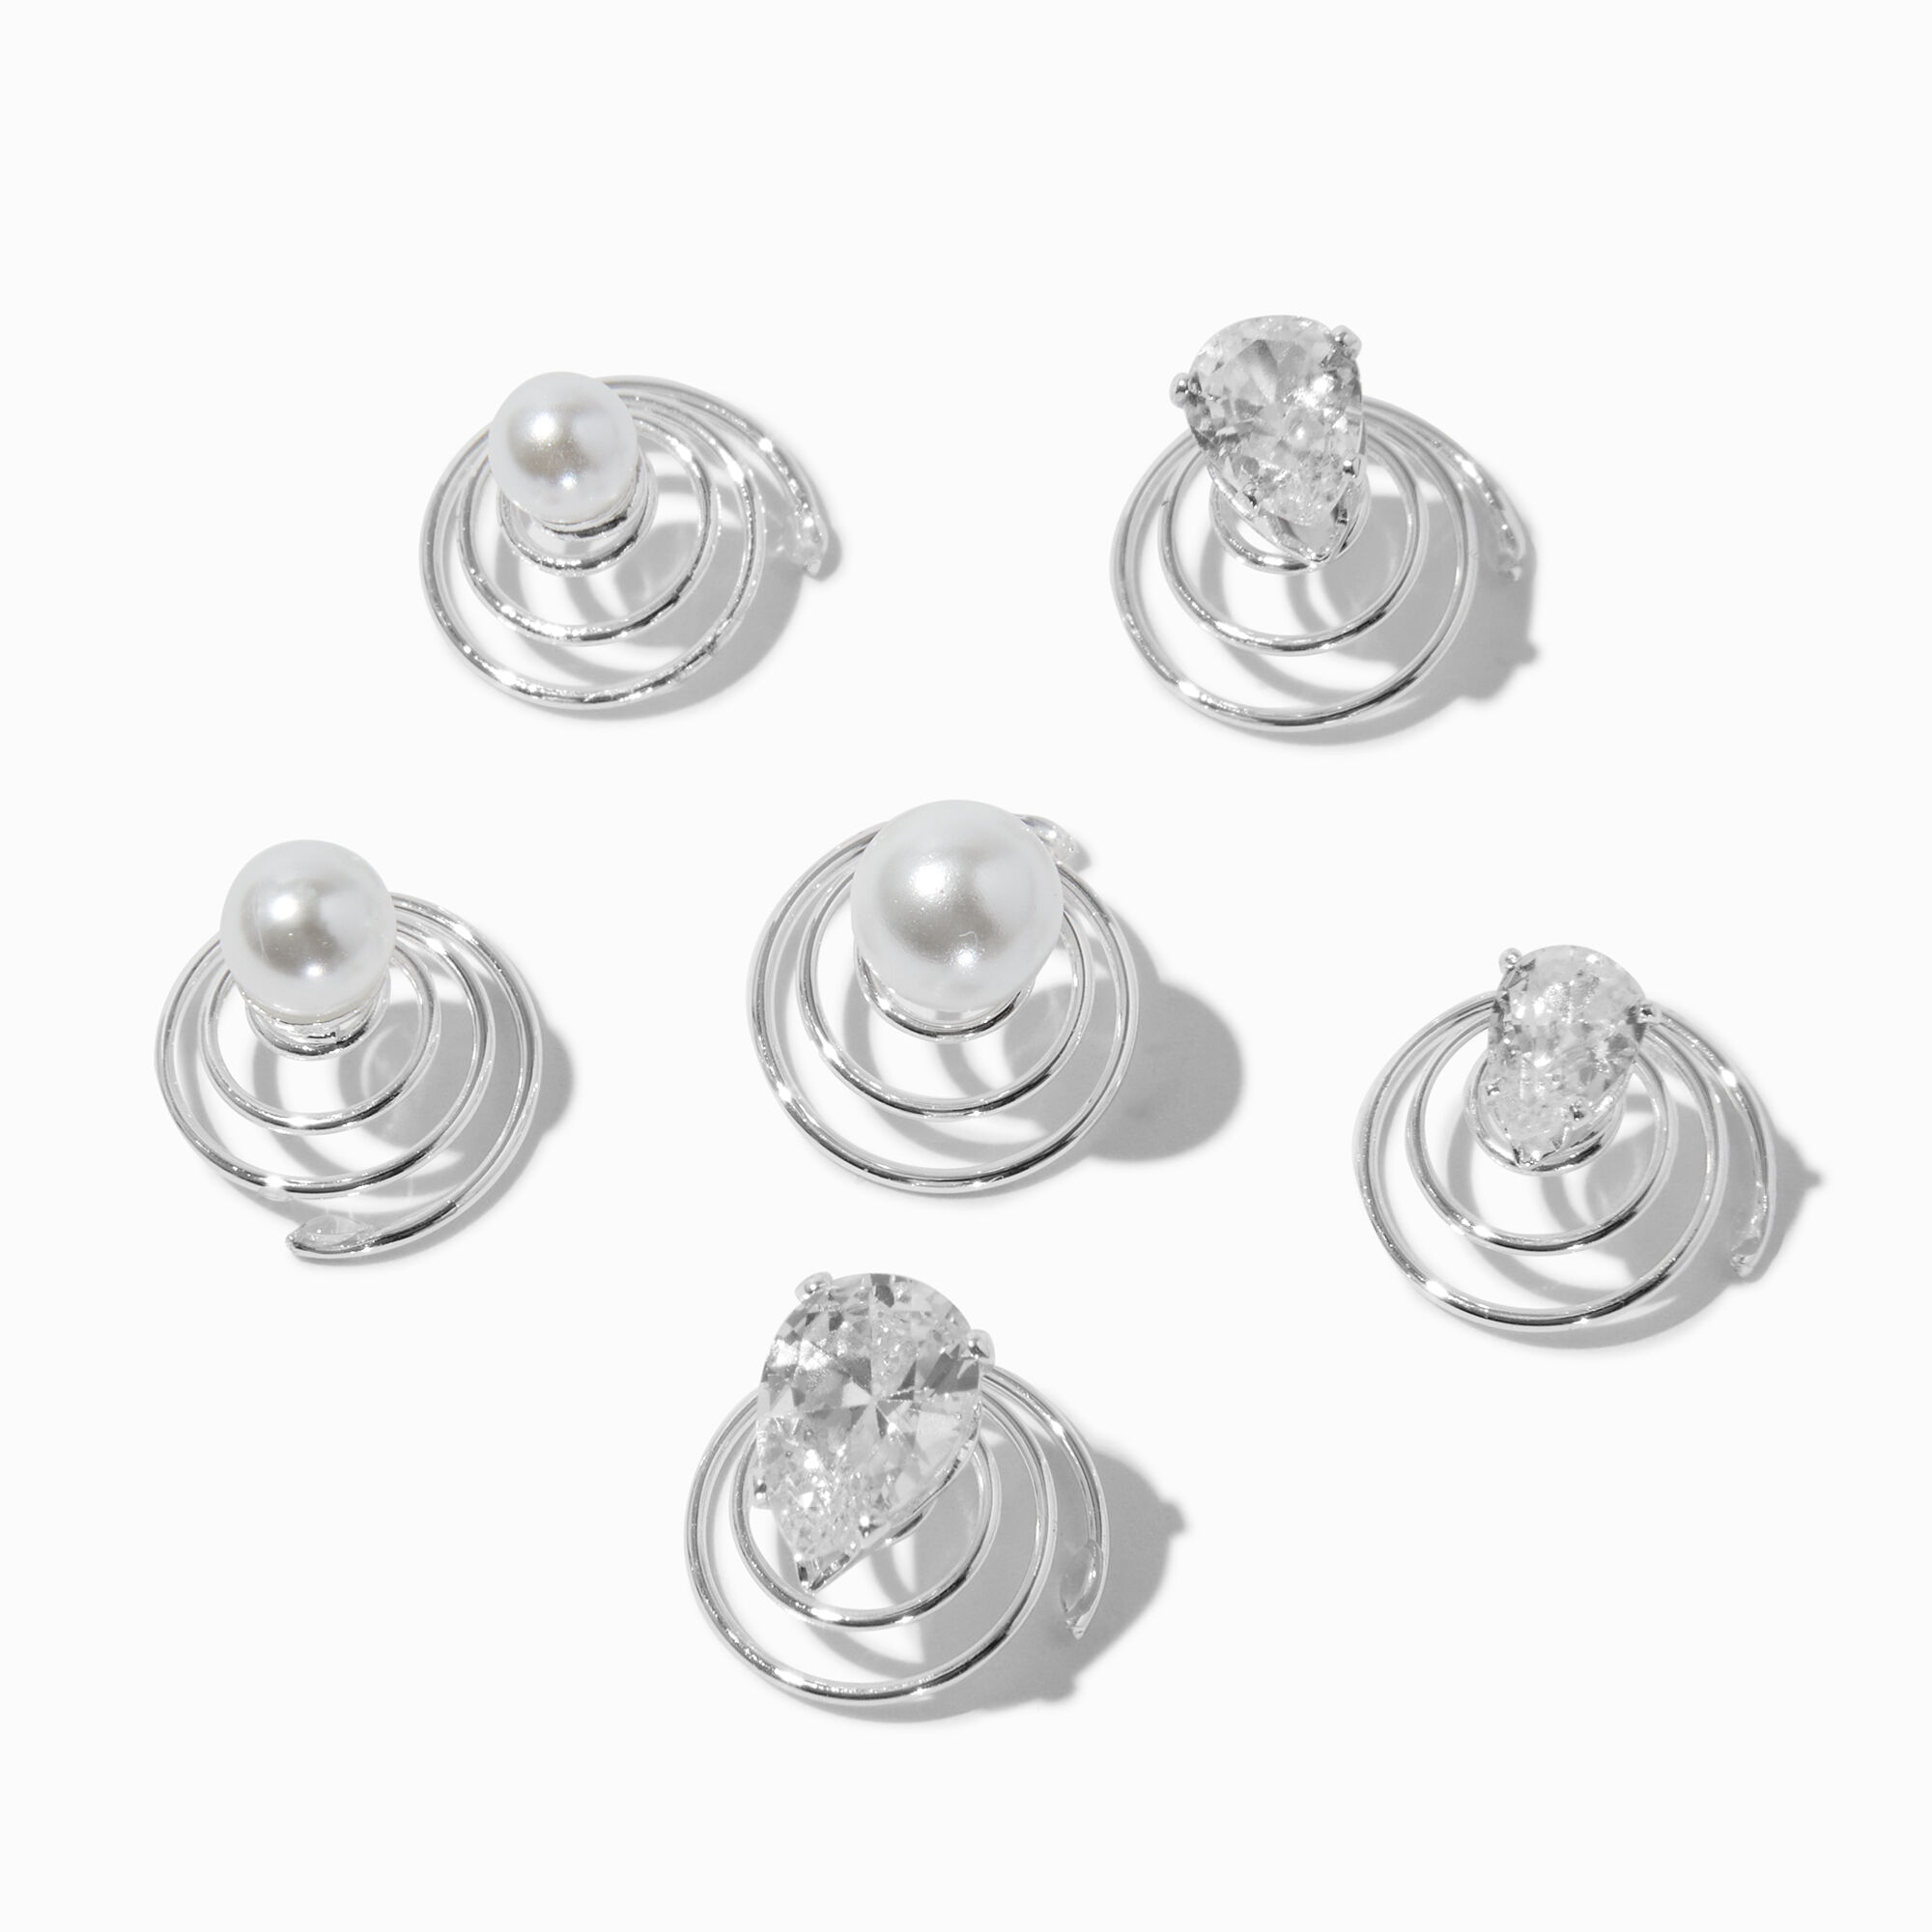 View Claires SilverTone Cubic Zirconia Pearl Hair Spinners 6 Pack White information